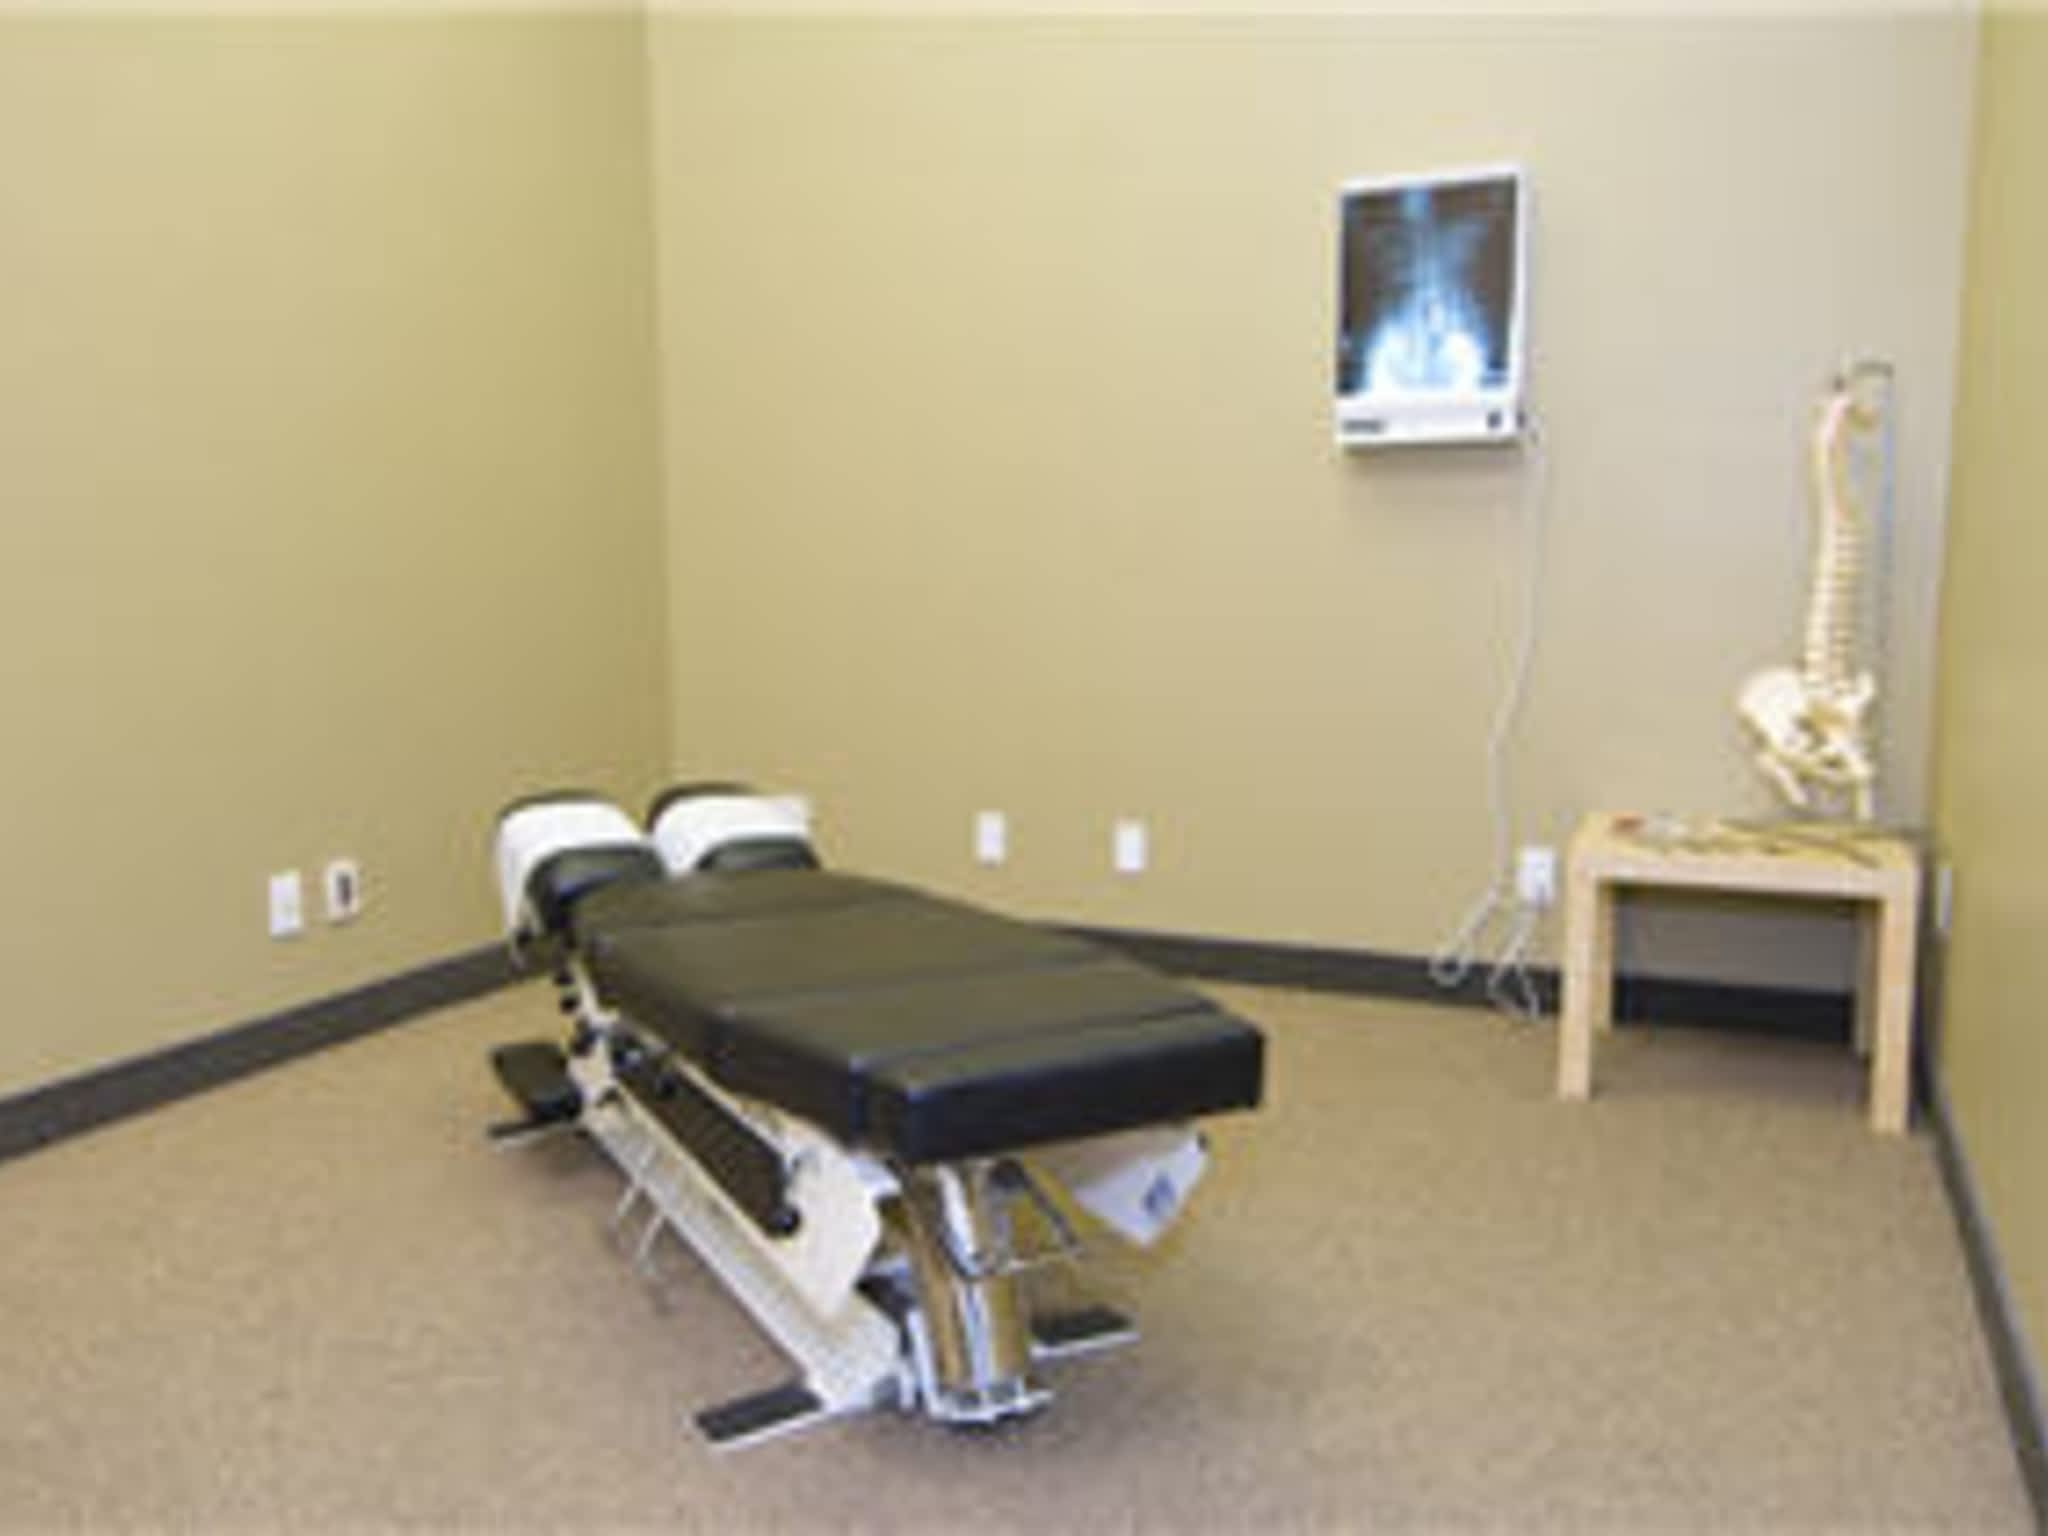 photo In Balance Acupuncture & Health Centre